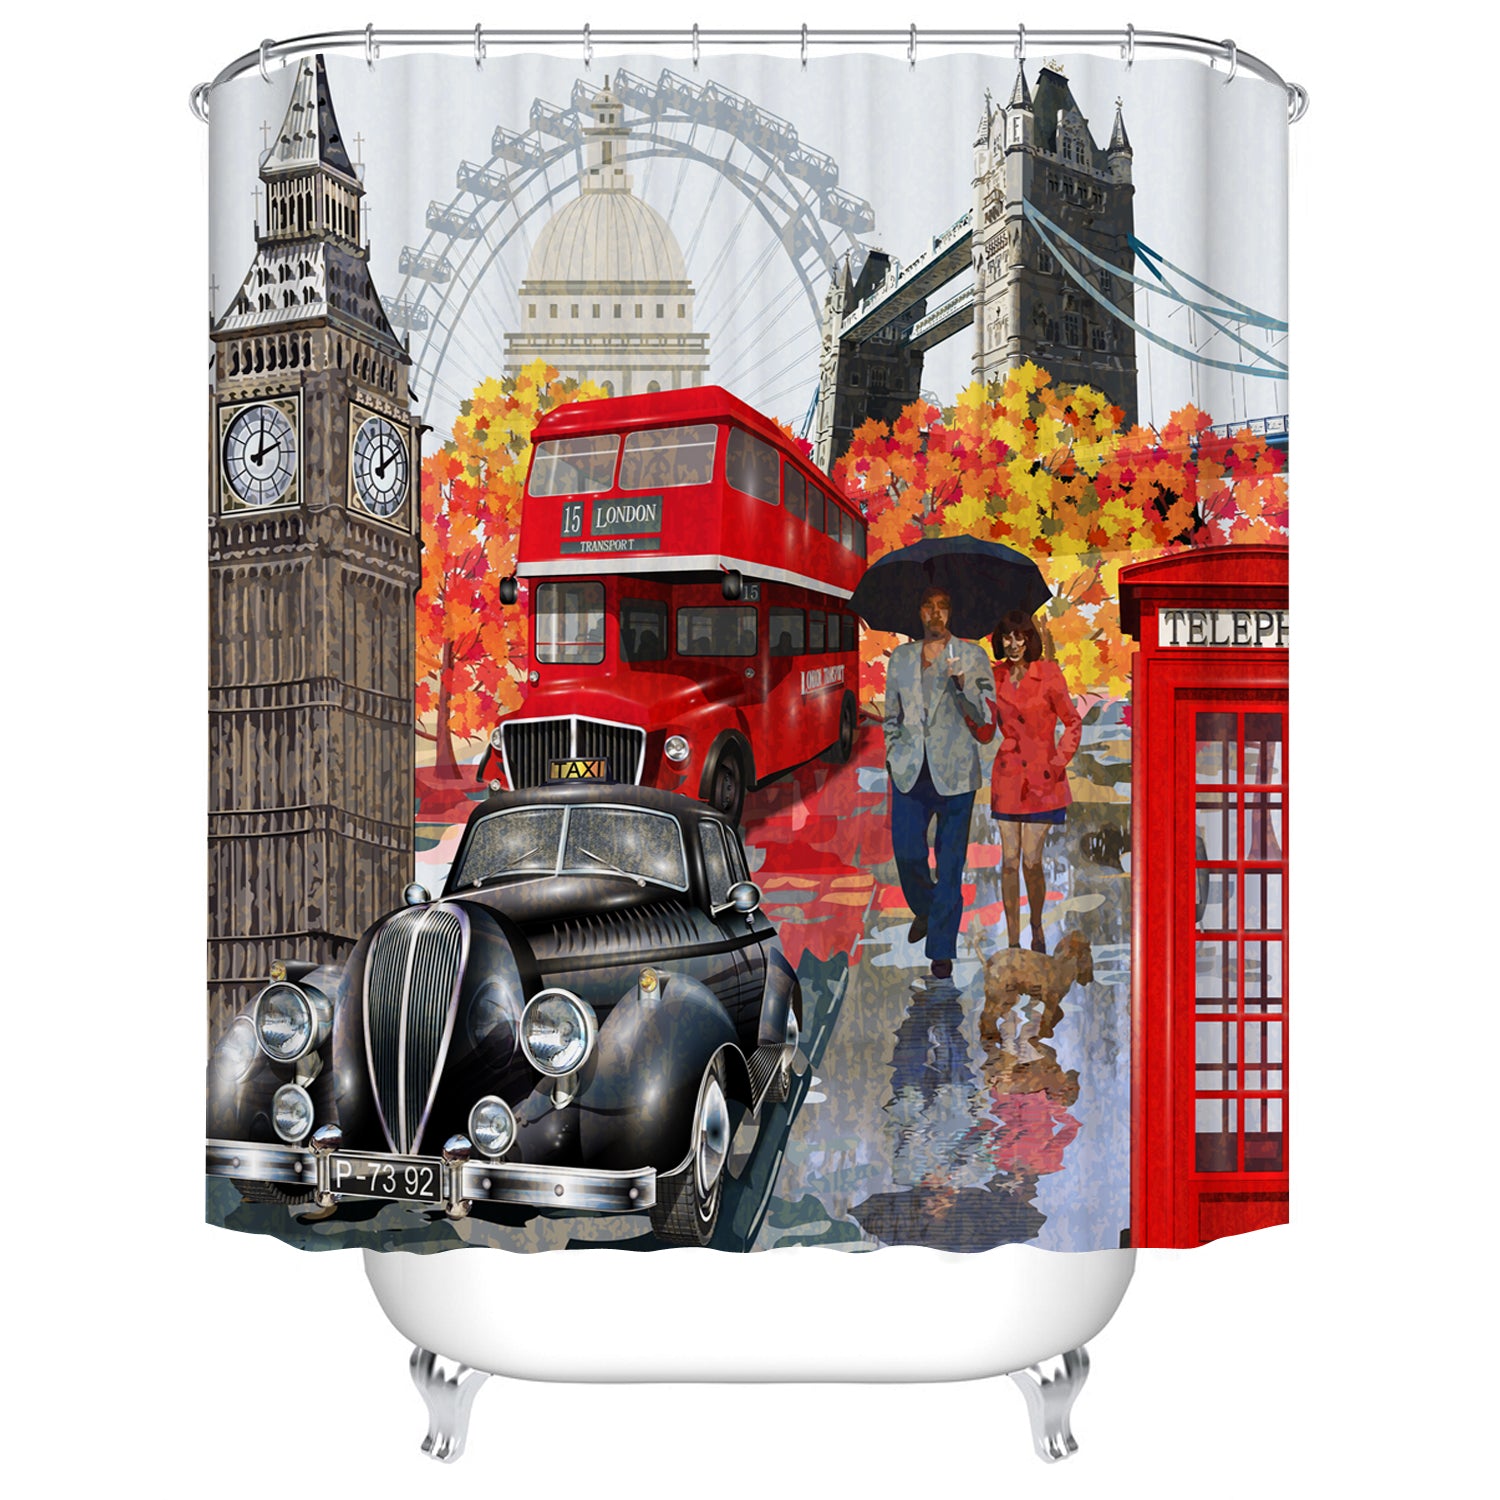 Vintage London City Collage Bus Telephone Booth Travel Shower Curtain